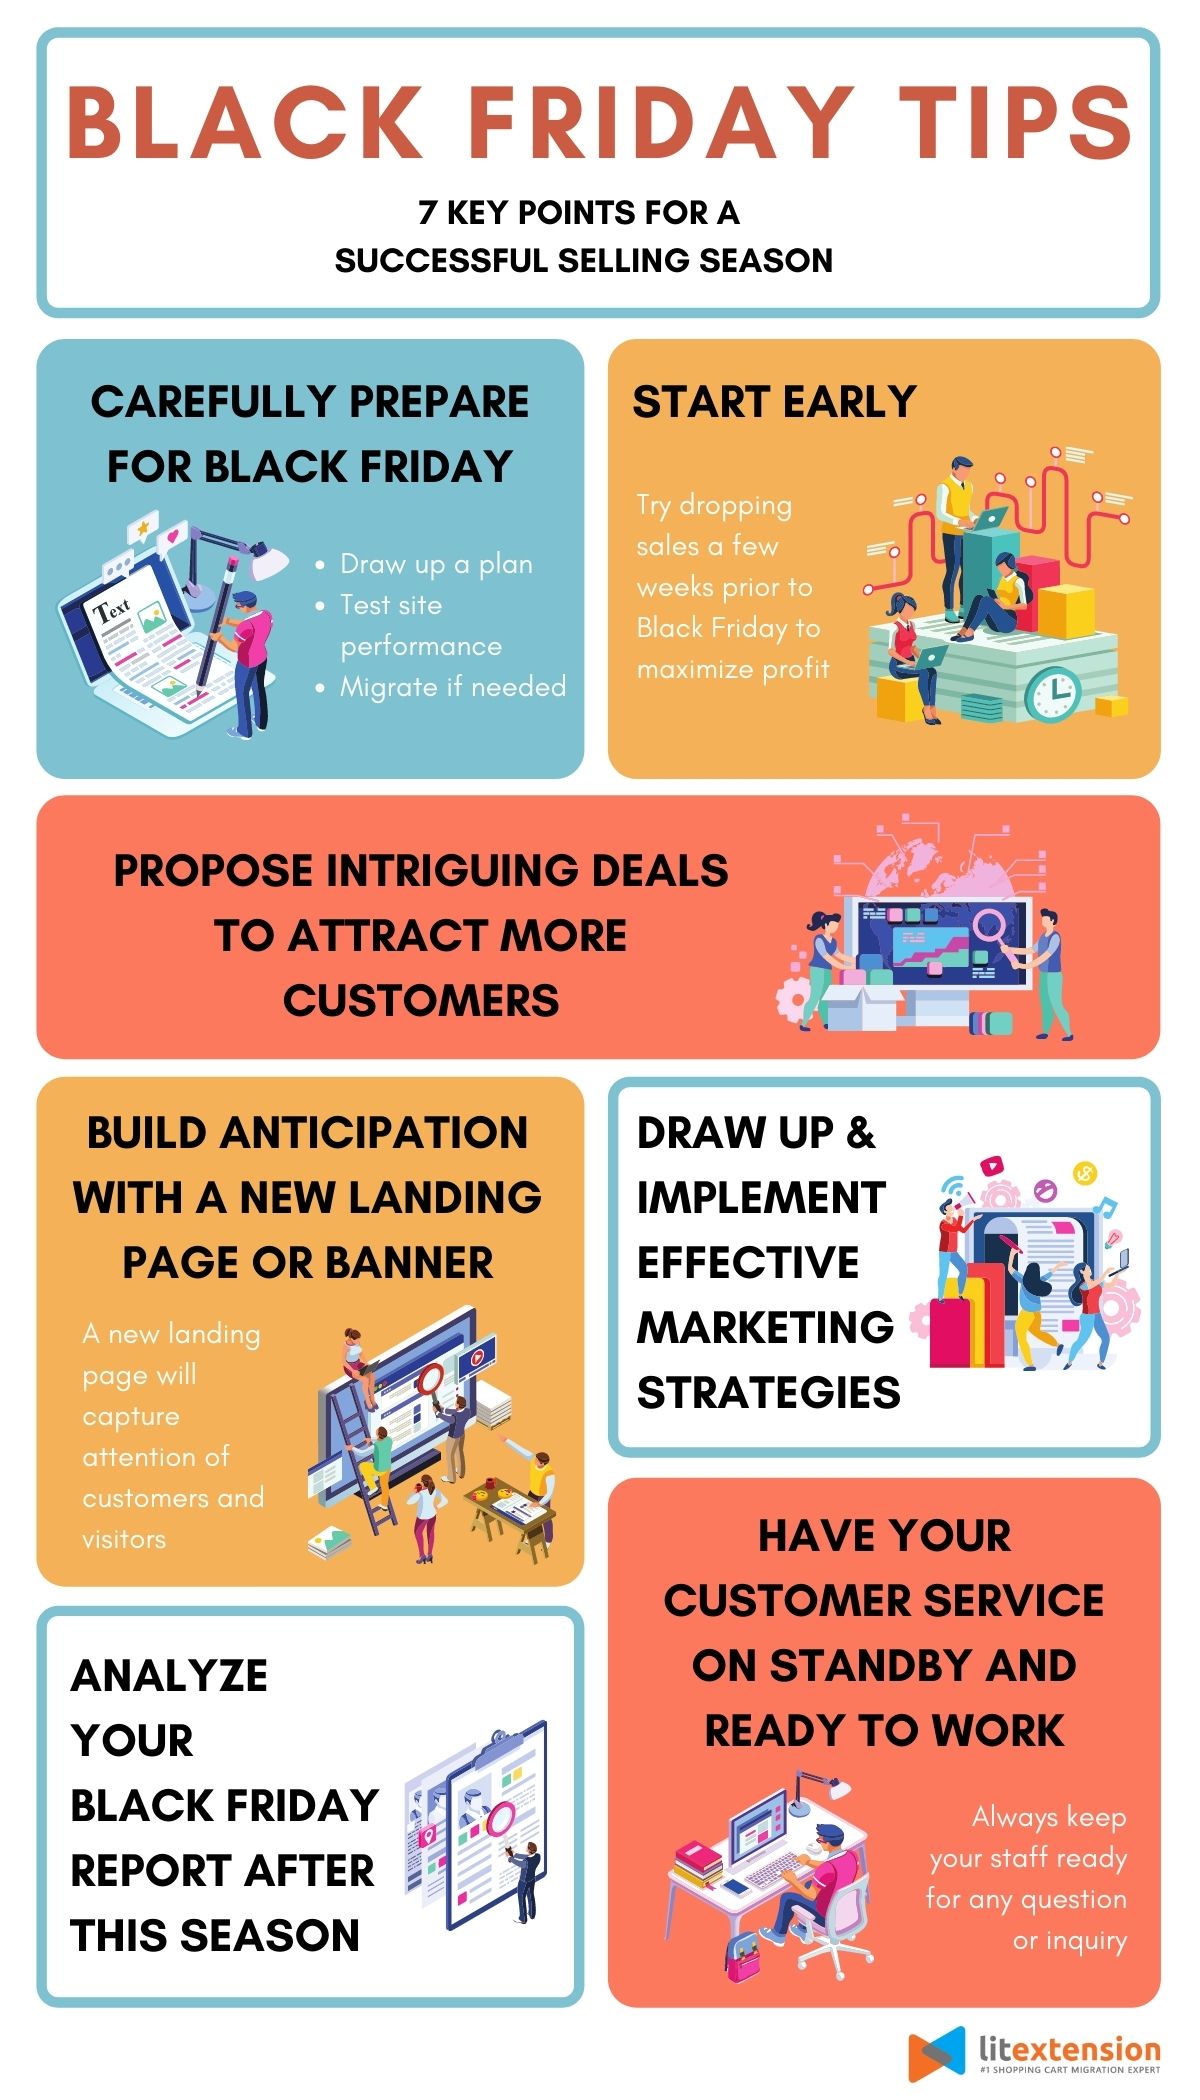 When Is Black Friday 2022? Date, Tips & Predicted Deals